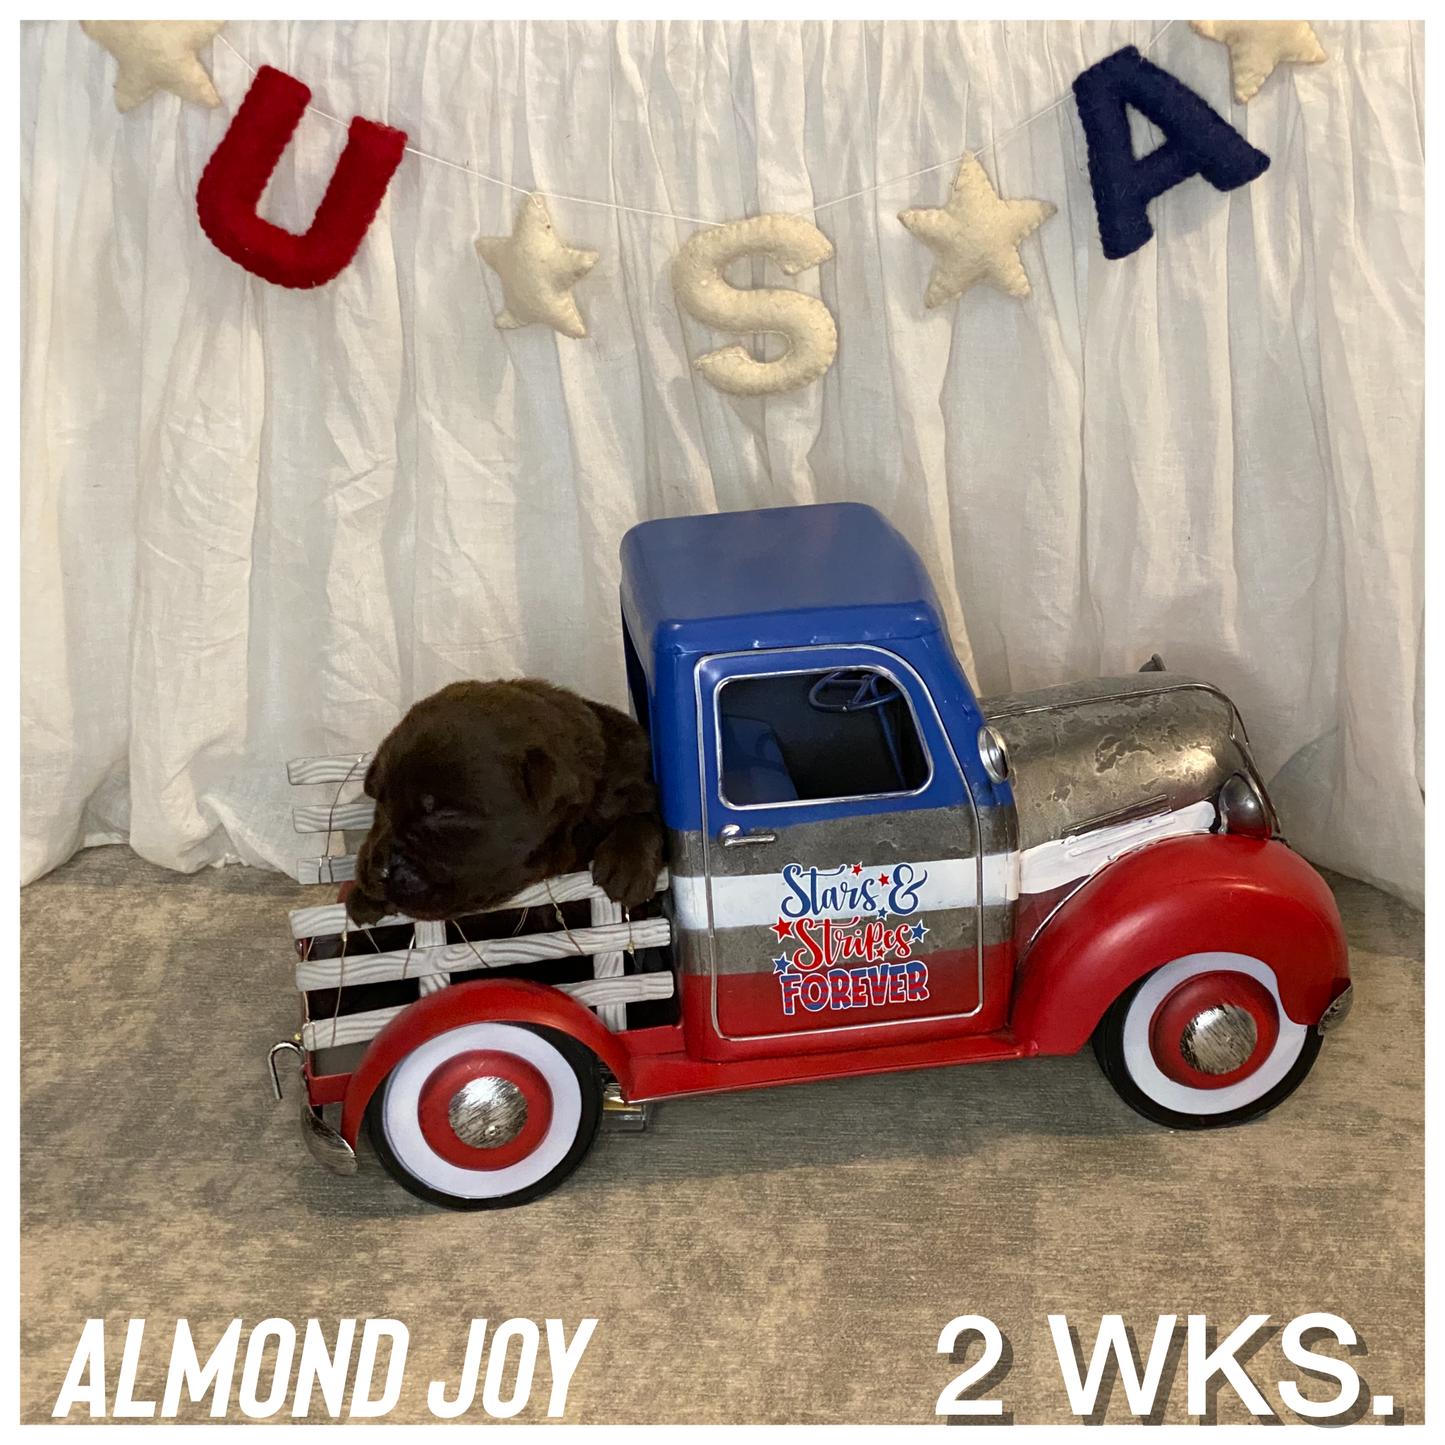 Picture of Chocolate Labrador puppy Almond Joy in a toy truck